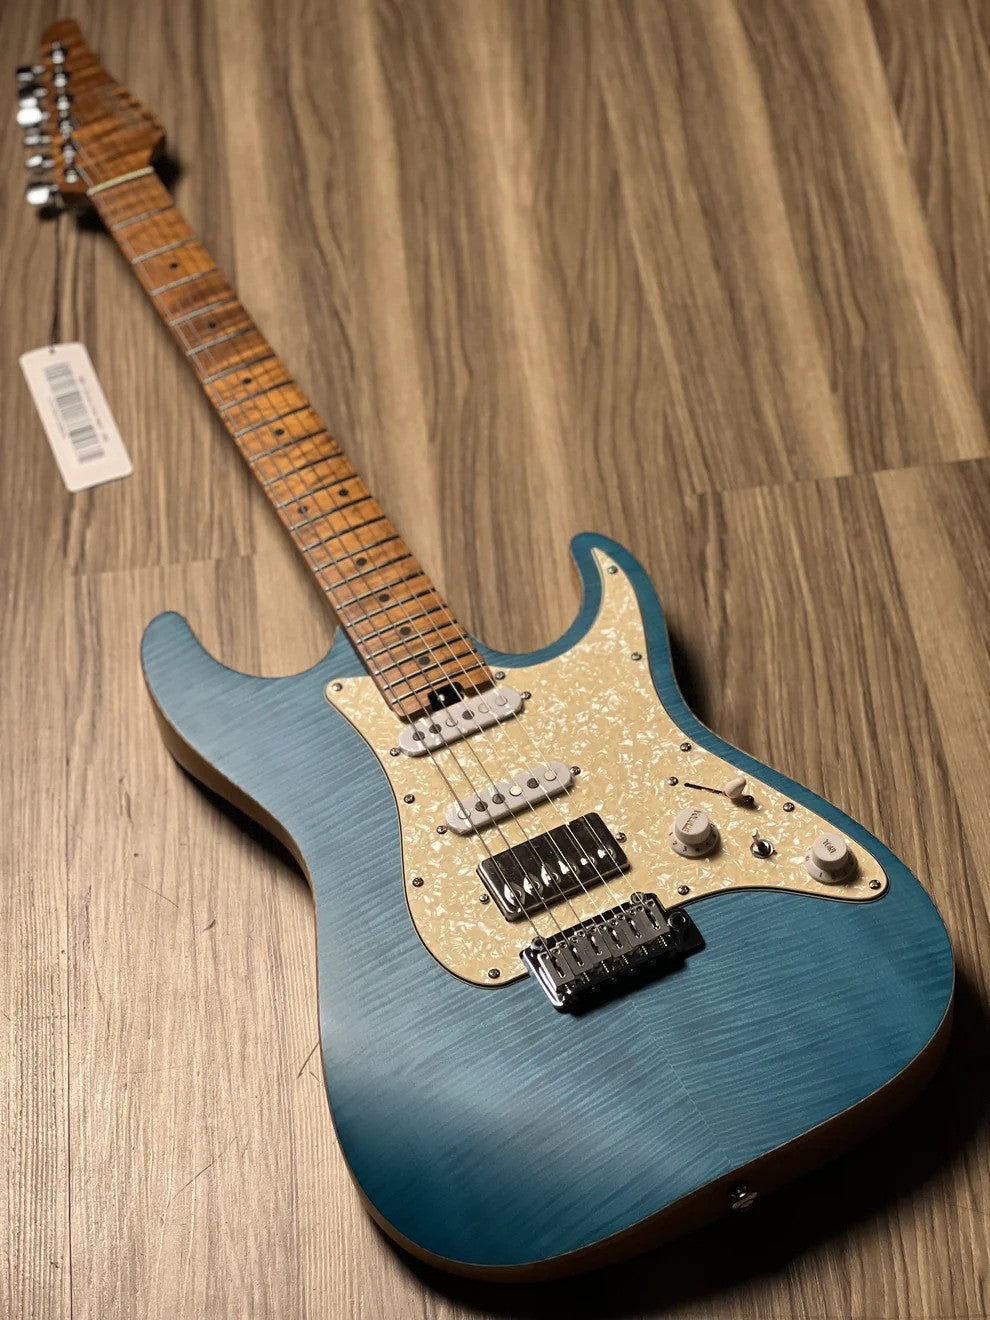 Soloking MS-1 Classic Flat Top FMN Roasted Flame Maple Neck in Jeans Pacific Blue